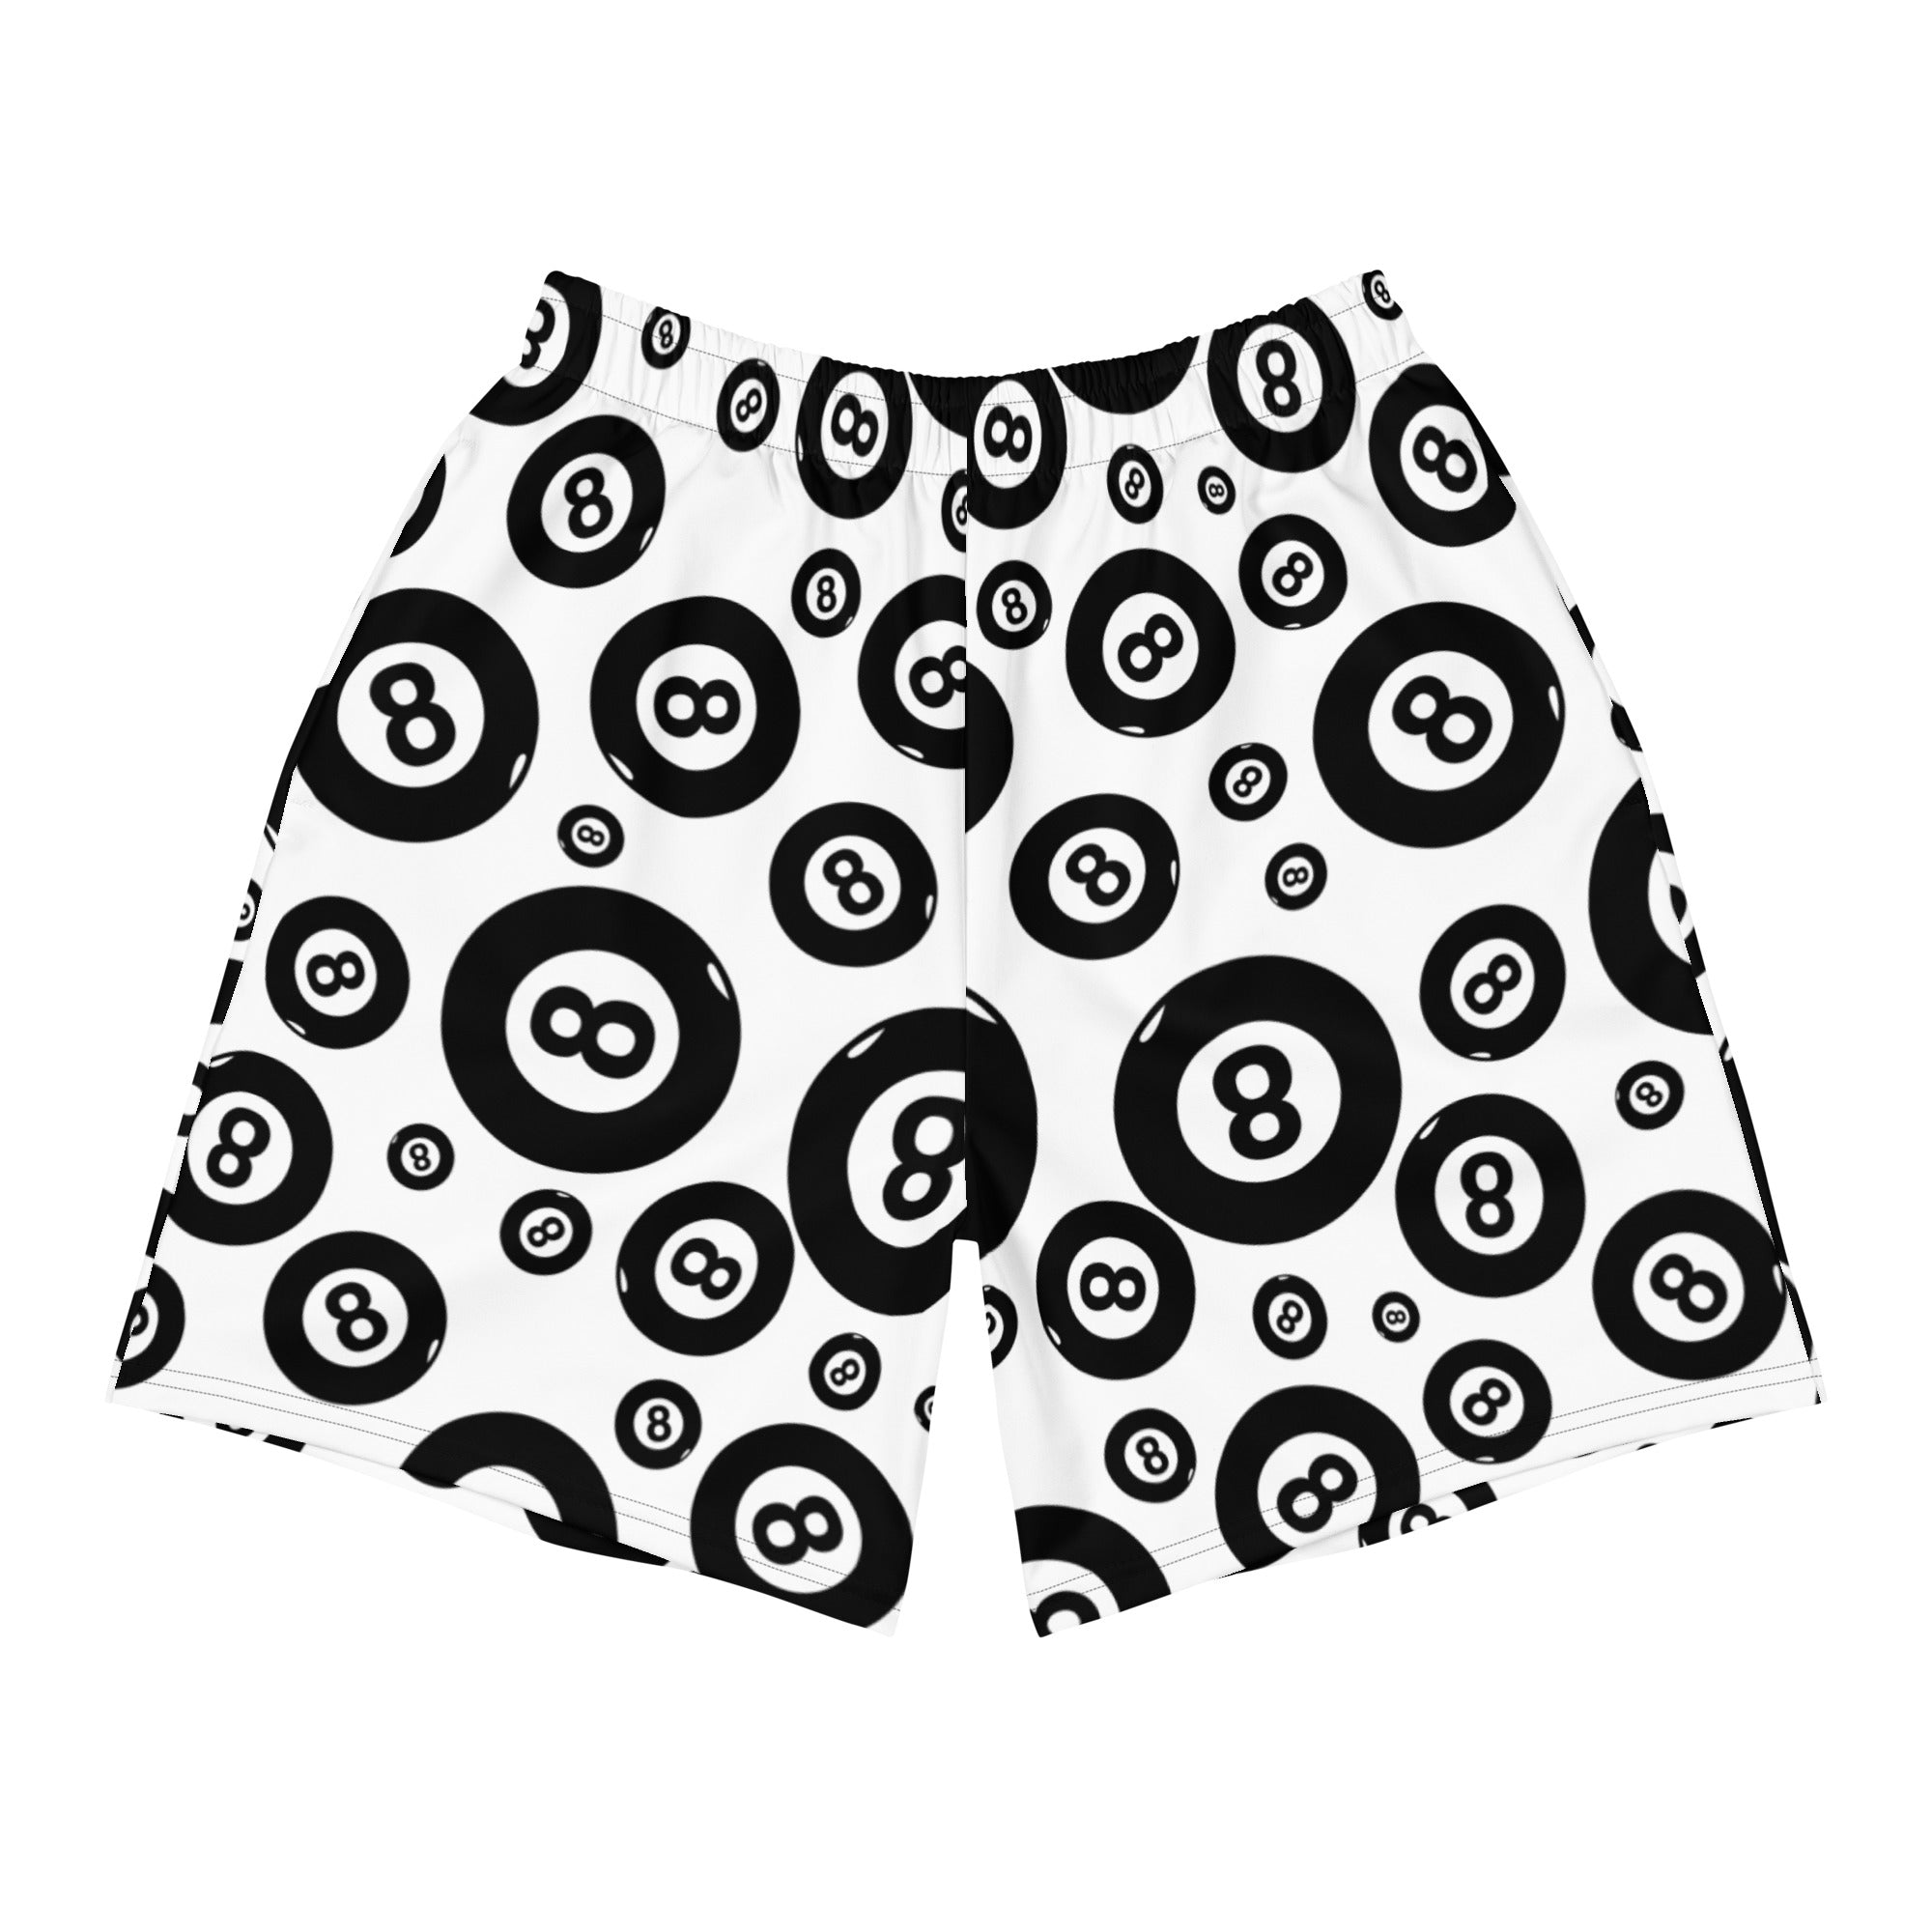 Eight Ball Athletic Shorts